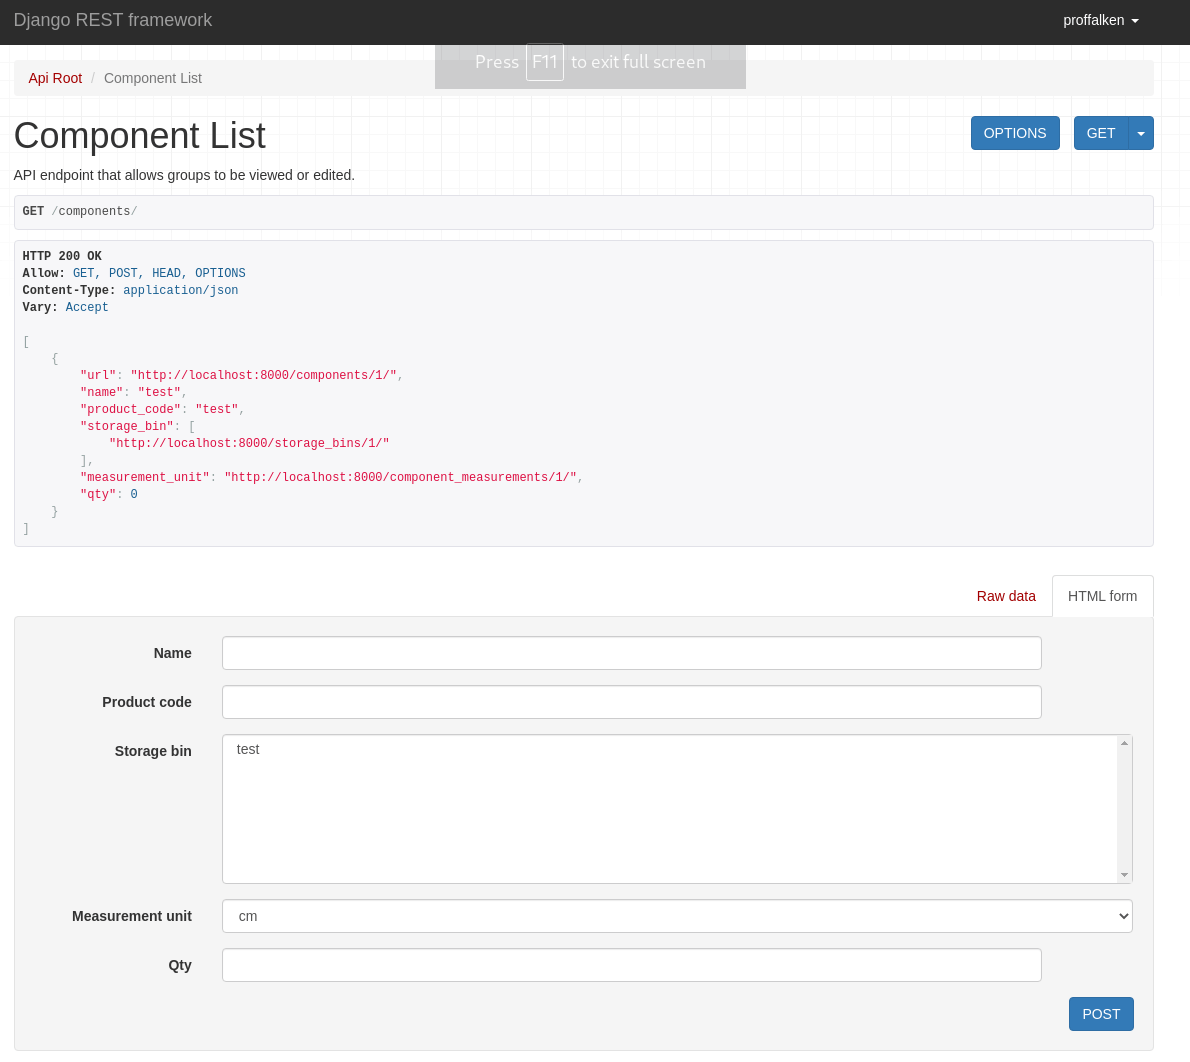 The API Component Page